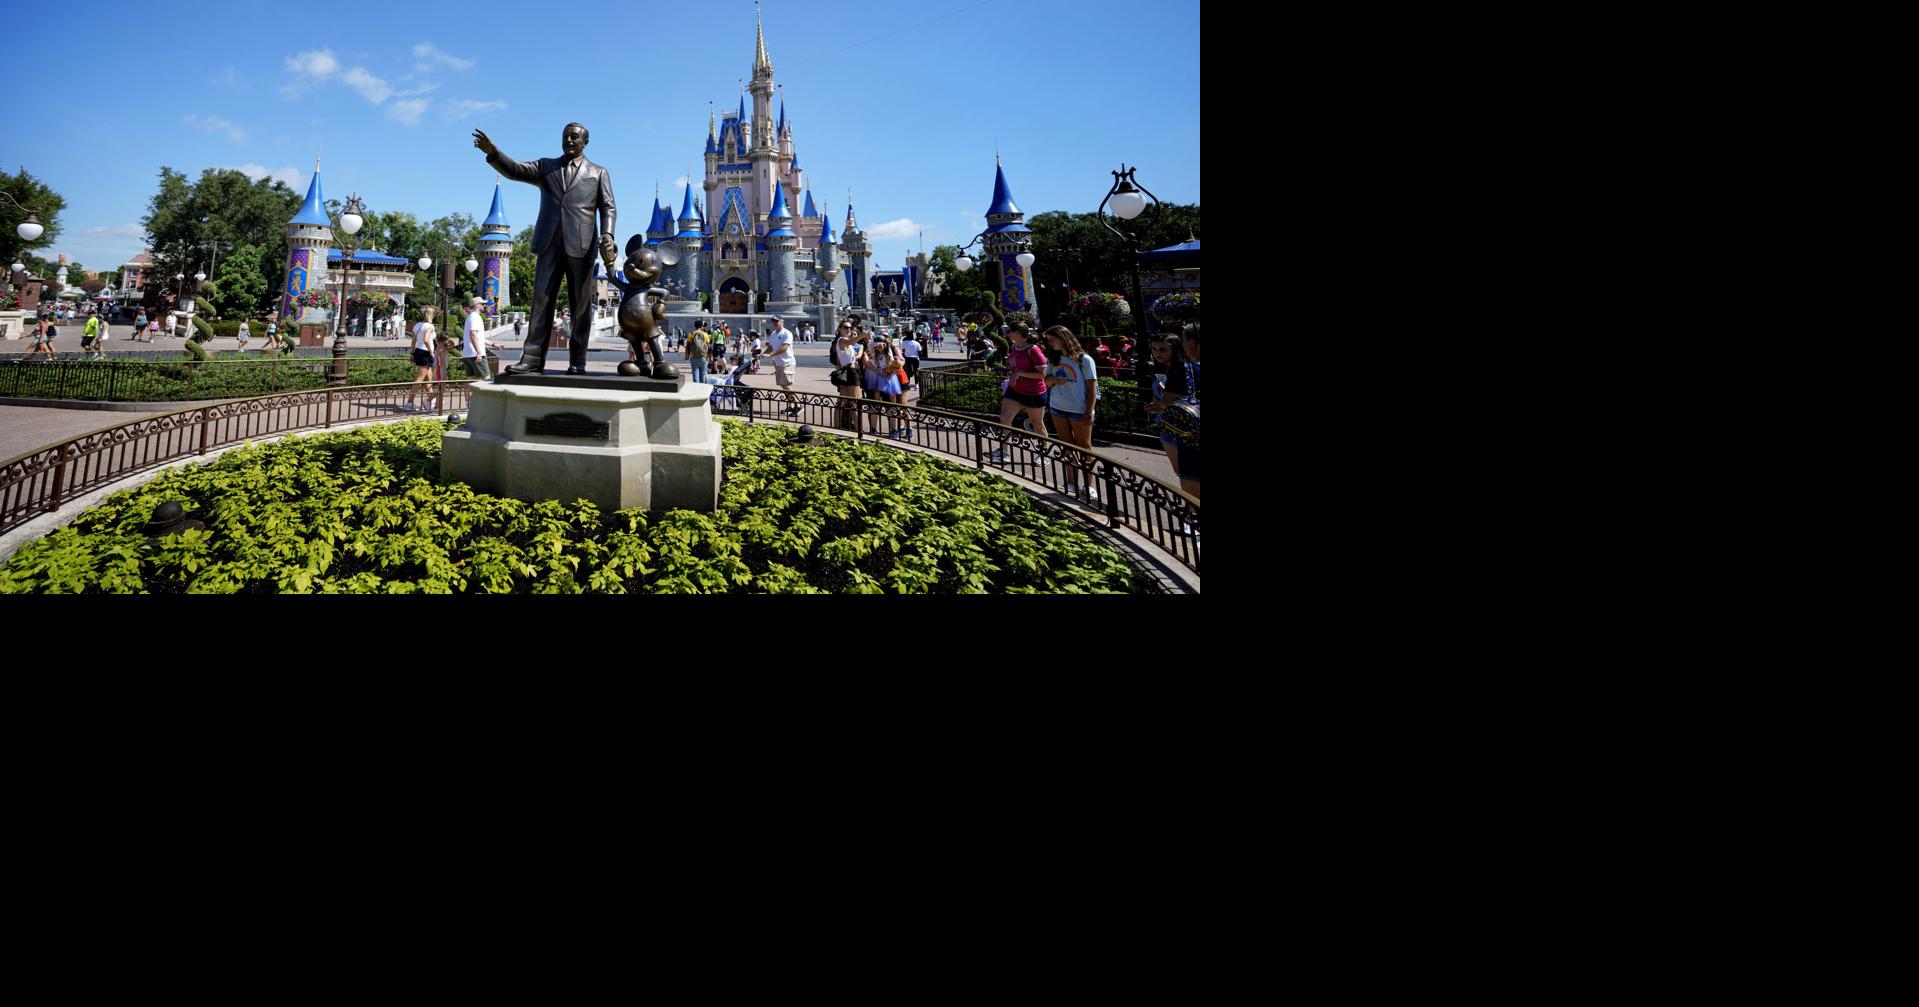 Illinois family accidentally bought $10K in Disney+ gift cards instead ...